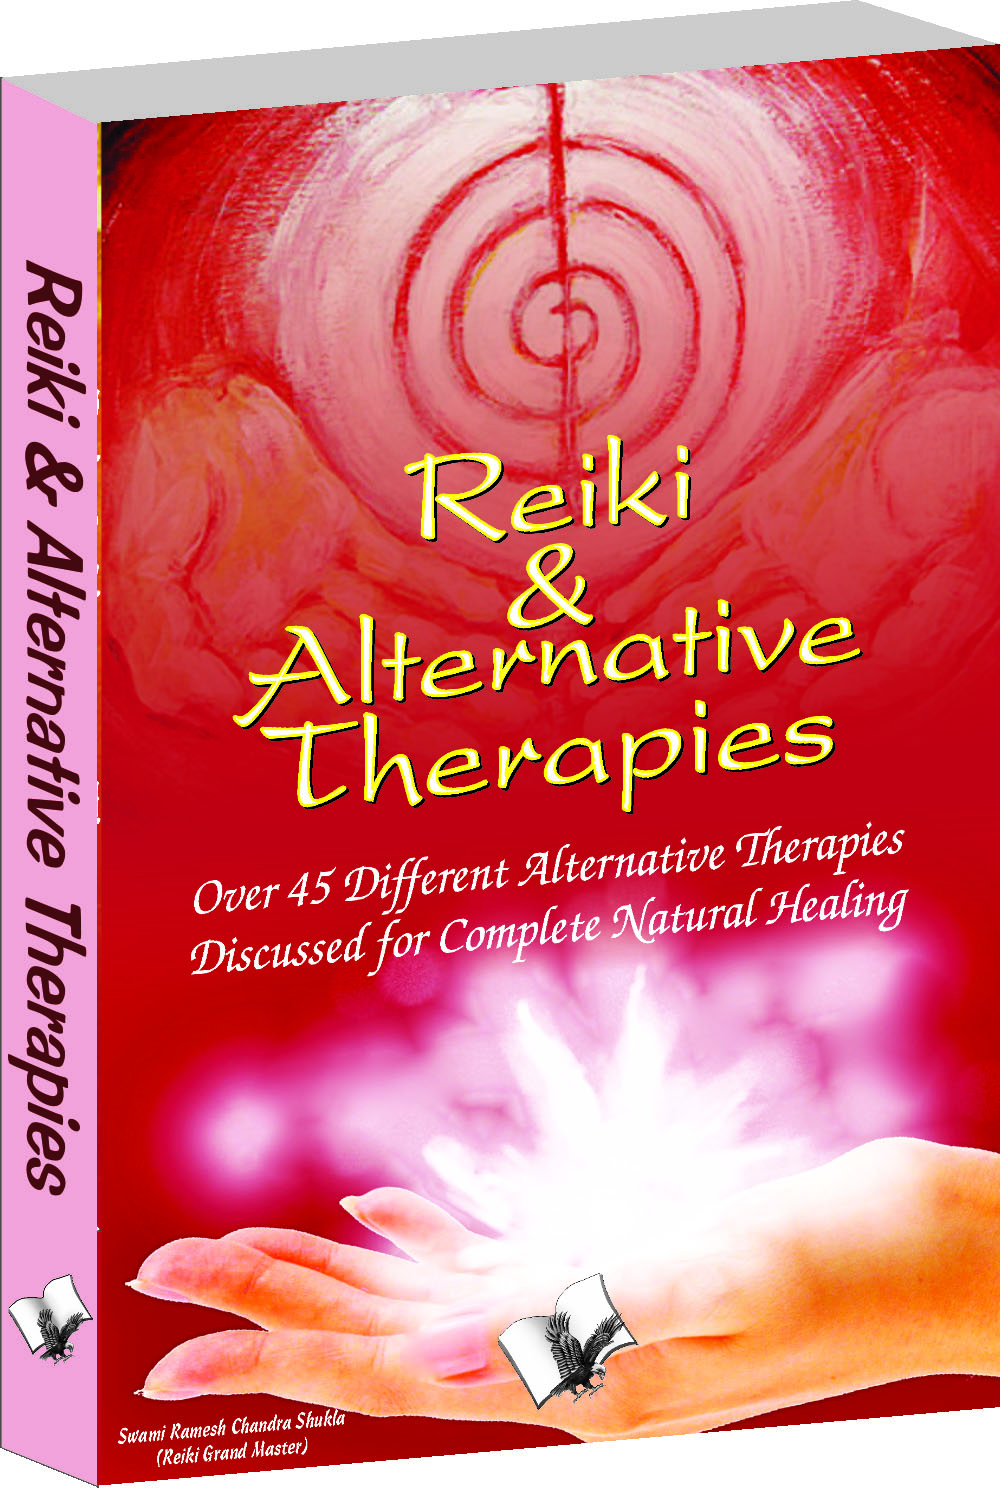 Reiki & Alternative Therapies -Healing with flowing hands without touching the patient